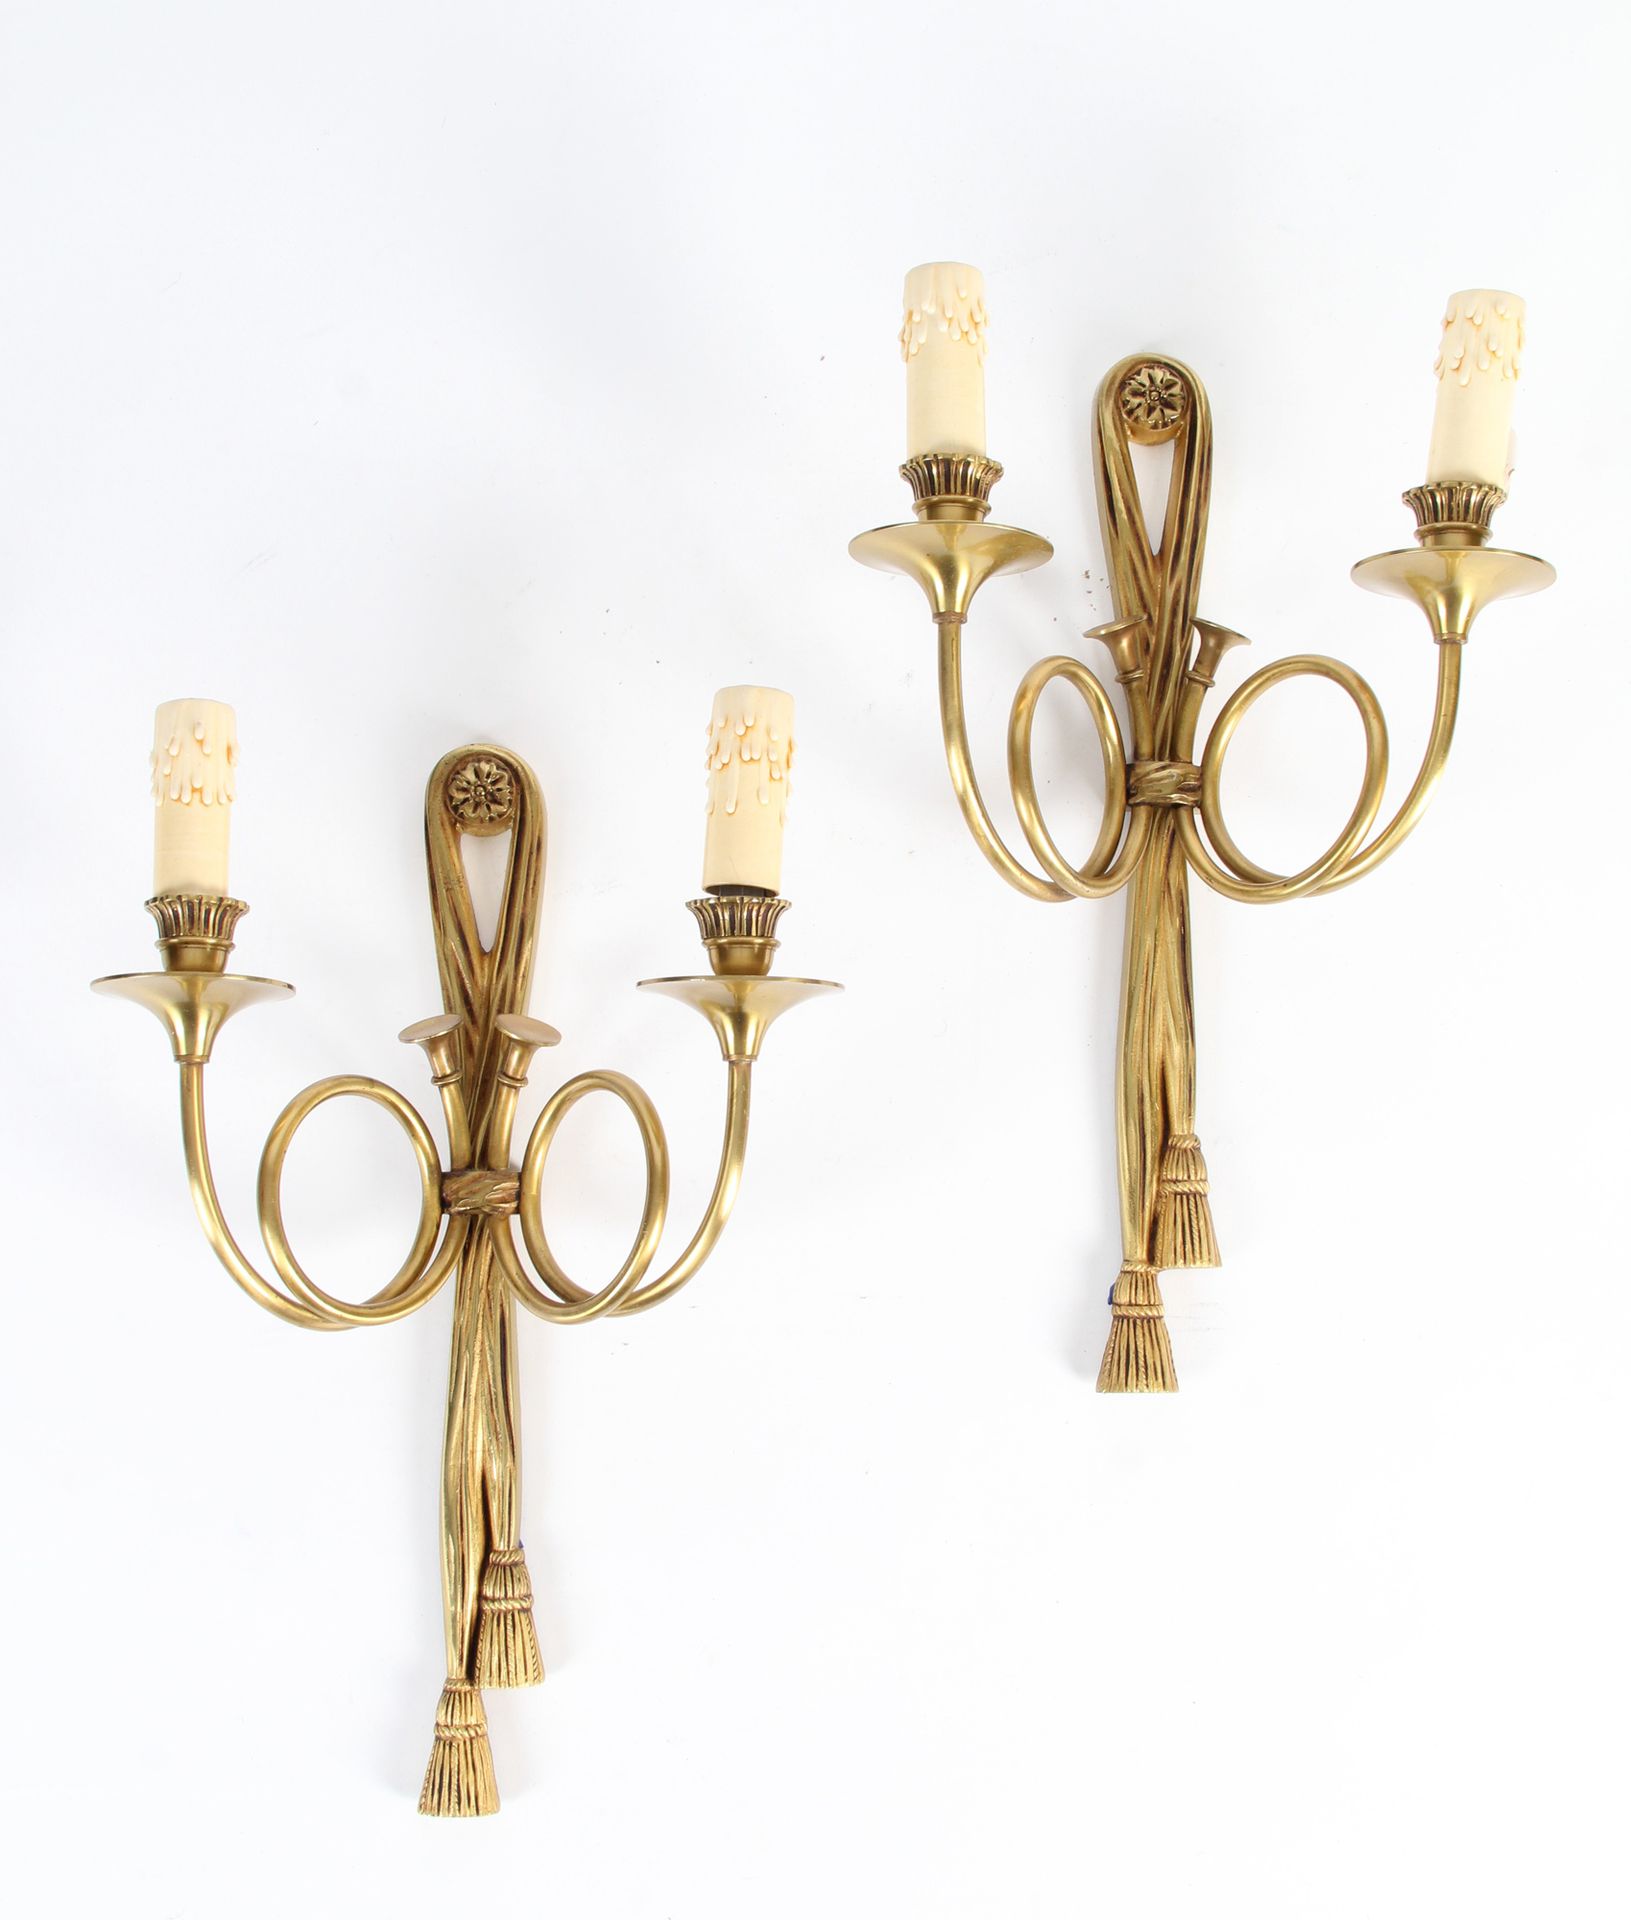 Null PAIR OF SCONCES

in gilt bronze, decorated with drapery and passementerie, &hellip;